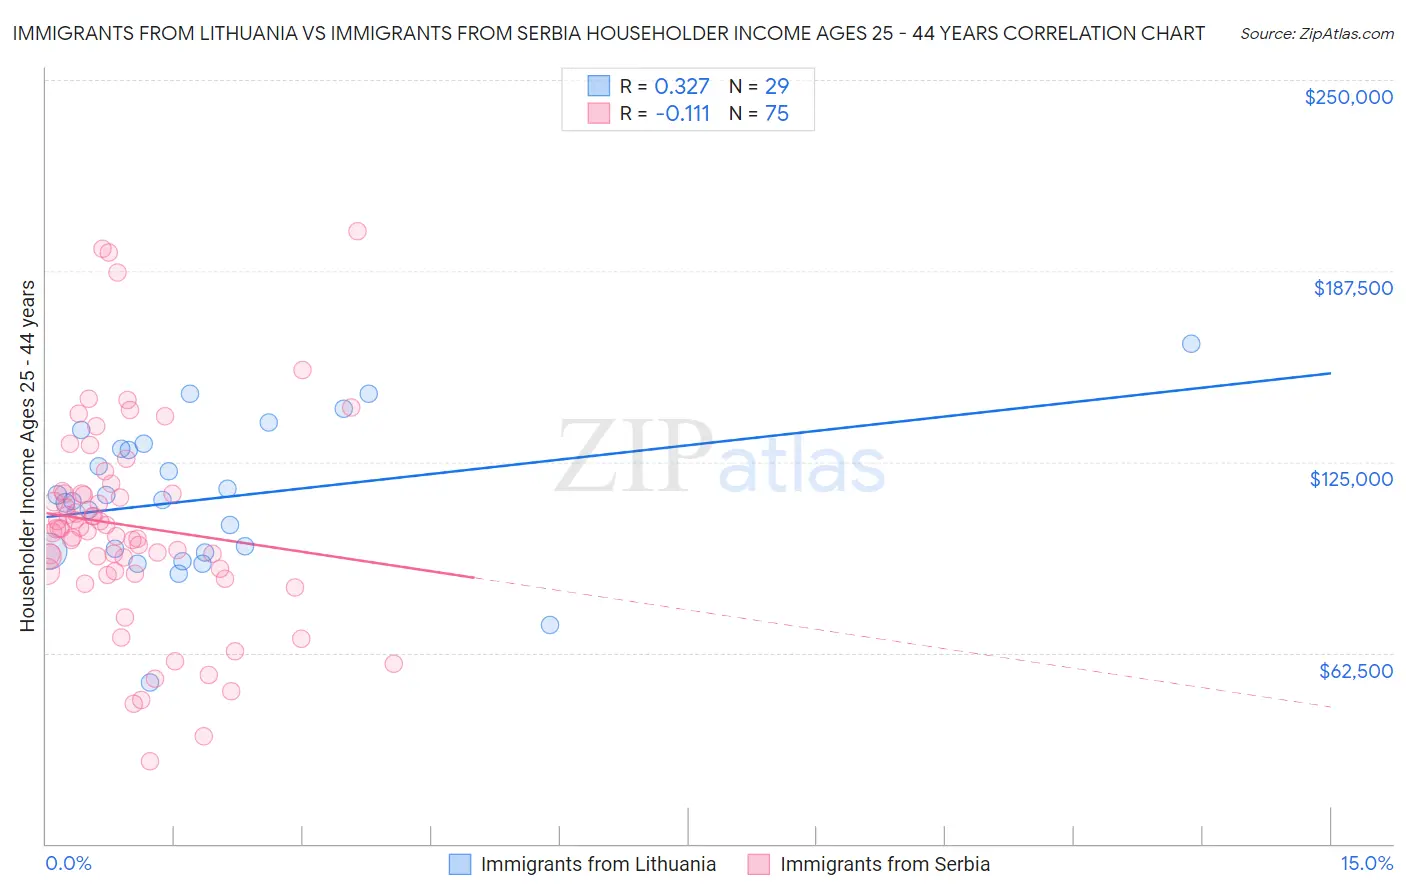 Immigrants from Lithuania vs Immigrants from Serbia Householder Income Ages 25 - 44 years